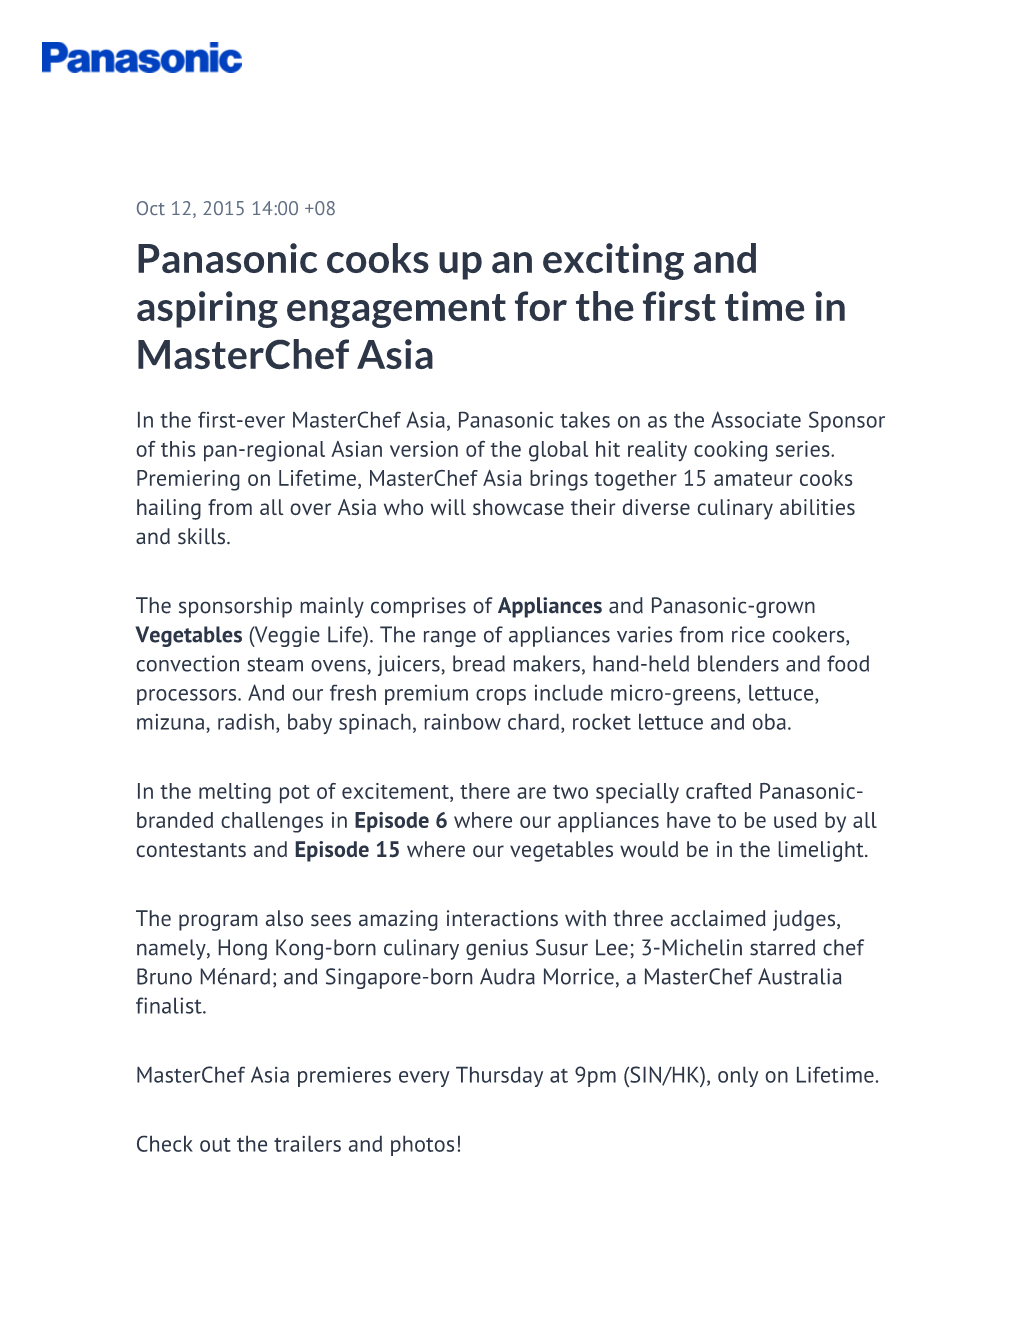 Panasonic Cooks up an Exciting and Aspiring Engagement for the First Time in Masterchef Asia